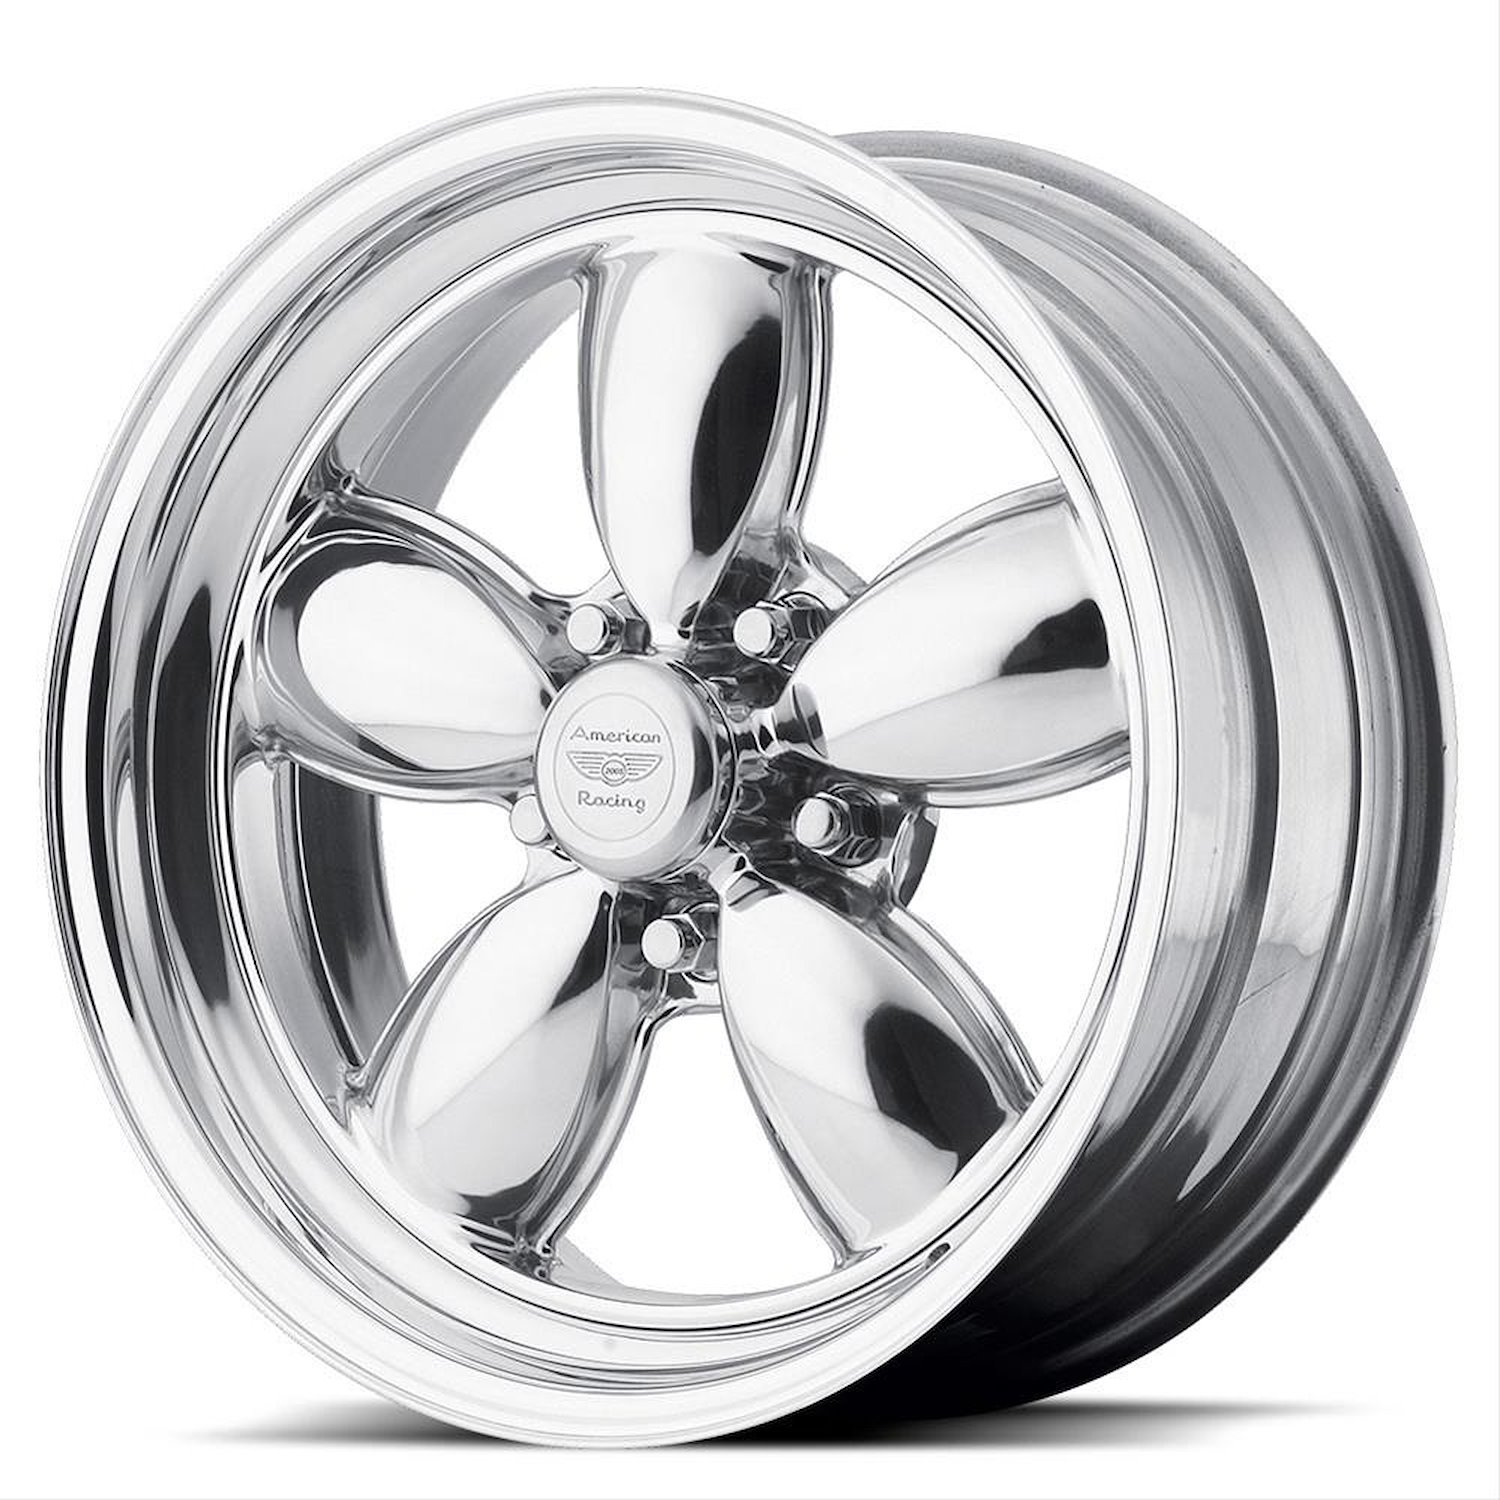 AMERICAN RACING CLASSIC 200S TWO-PIECE POLISHED 15 x 10 5X5.0 -25 4.52